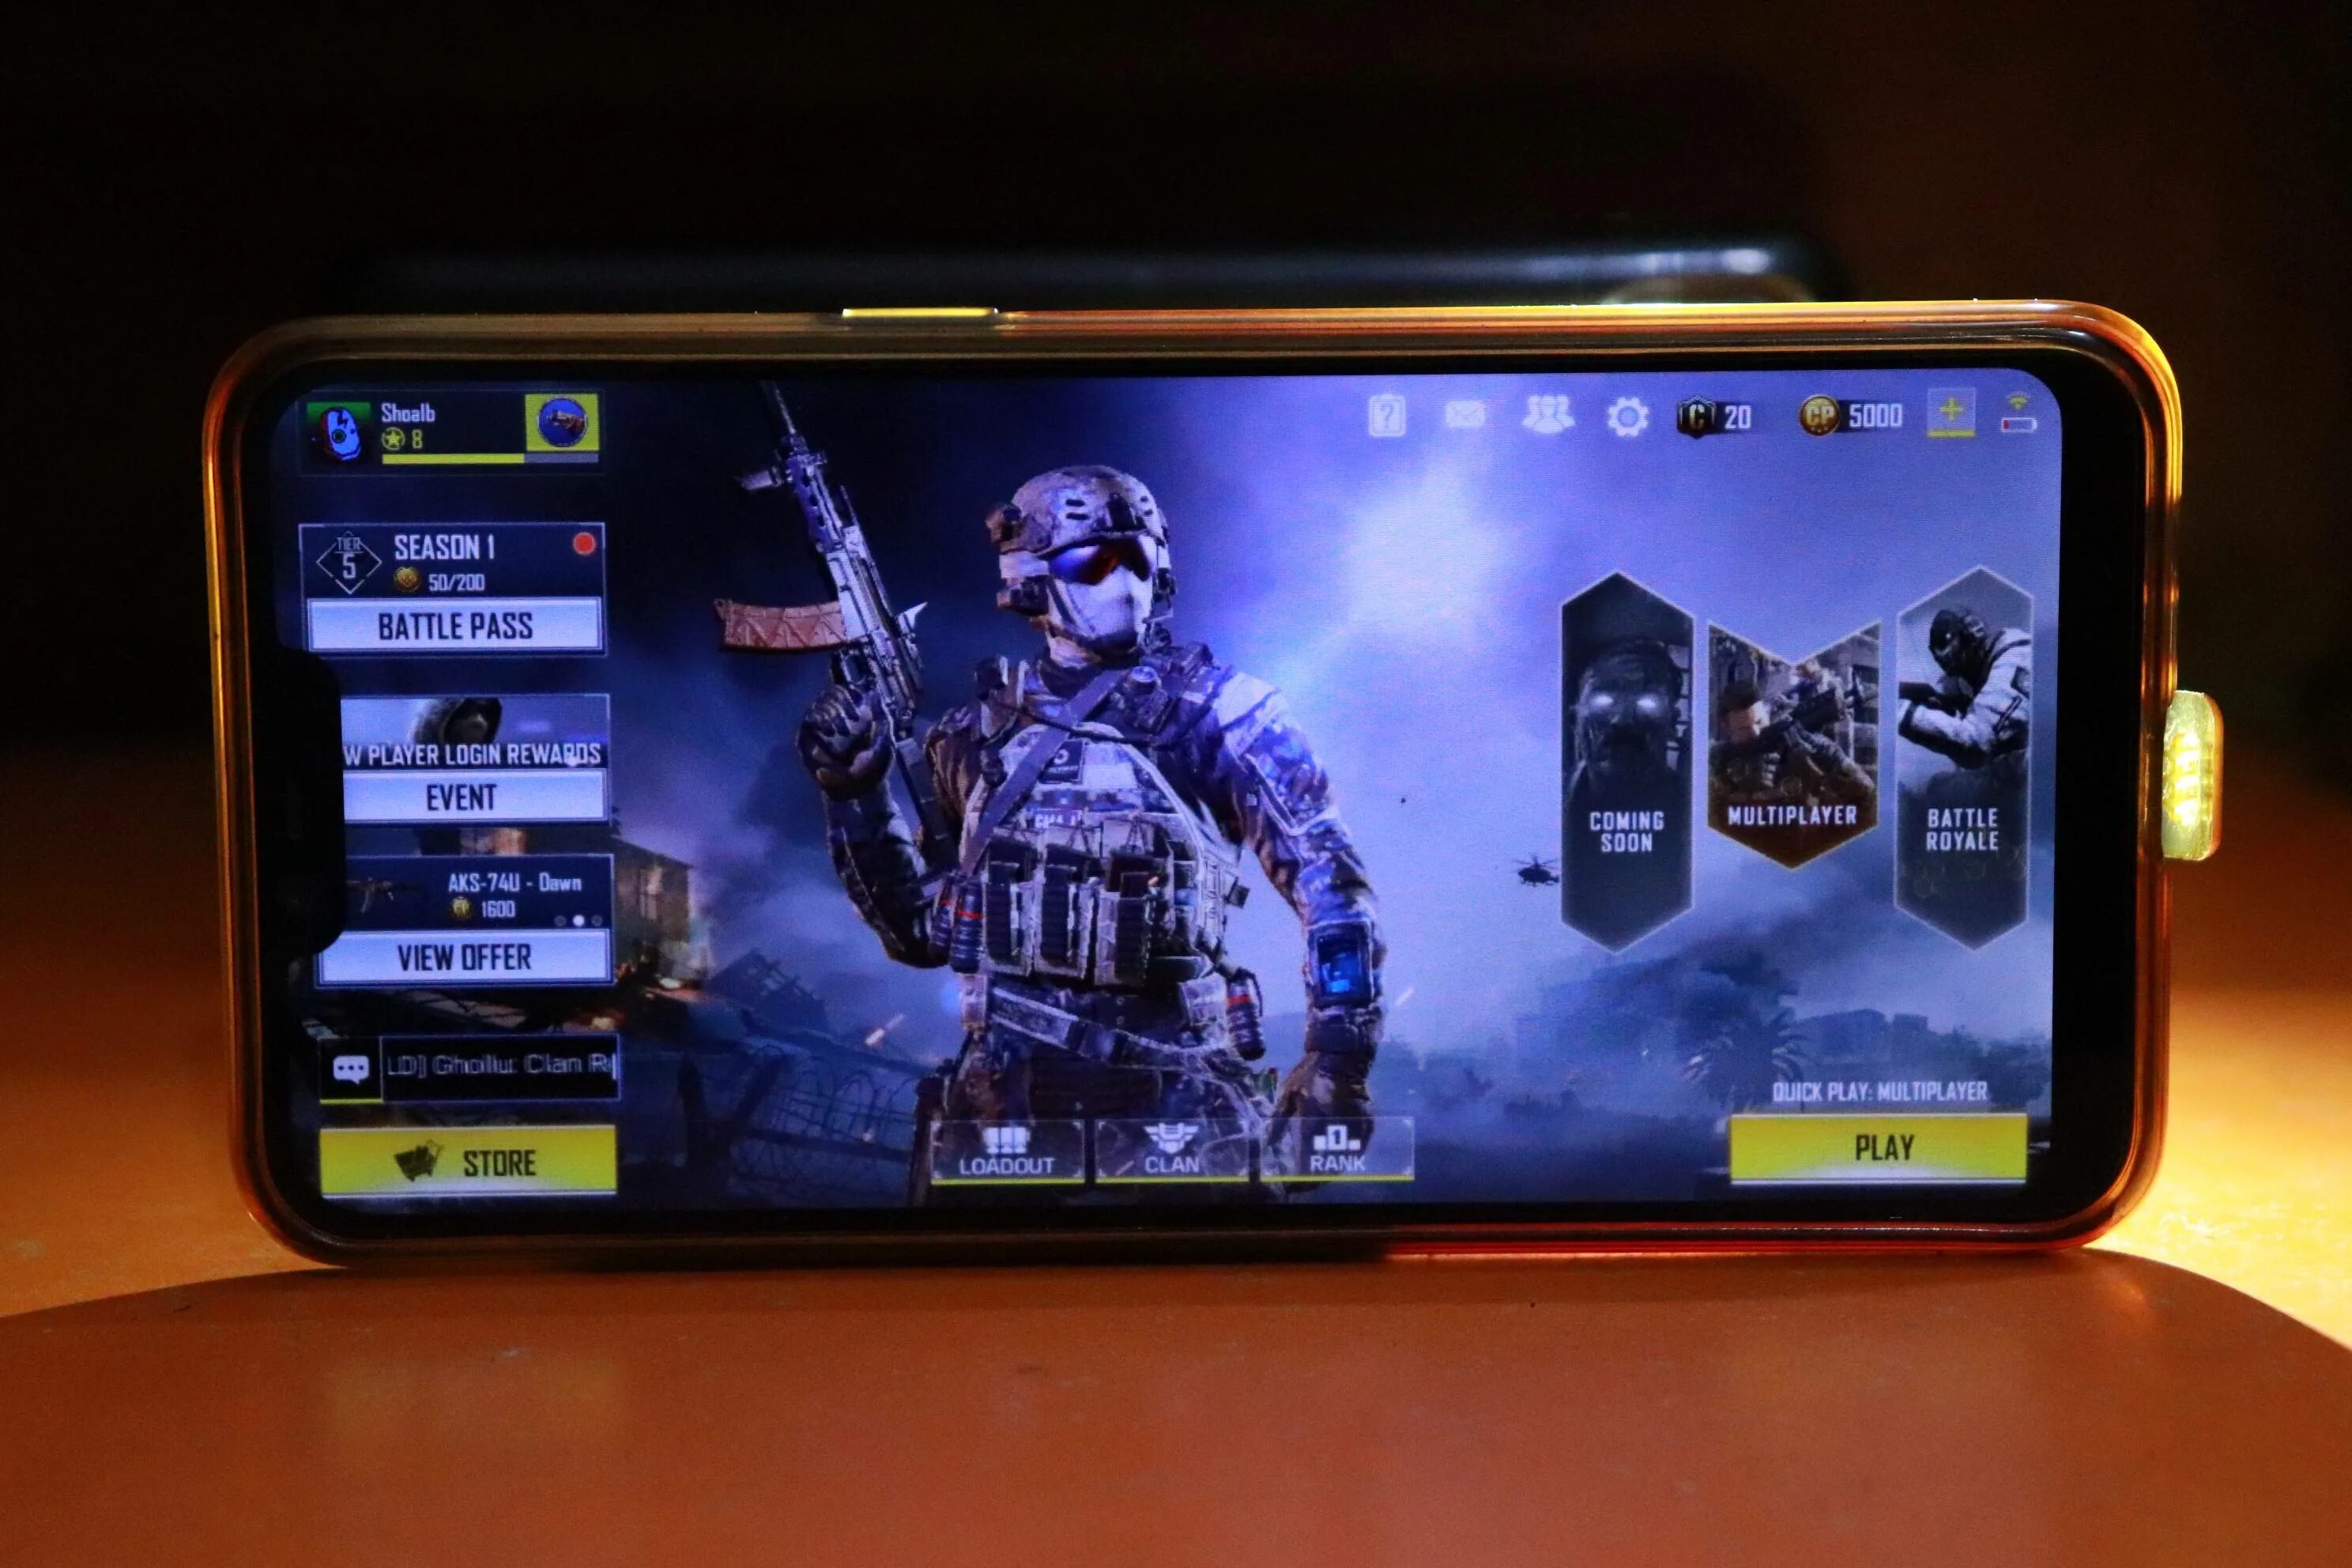 Call of Duty mobile. Call of Duty планшет. Call od Duty mobile фара. Call of Duty mobile т 90.